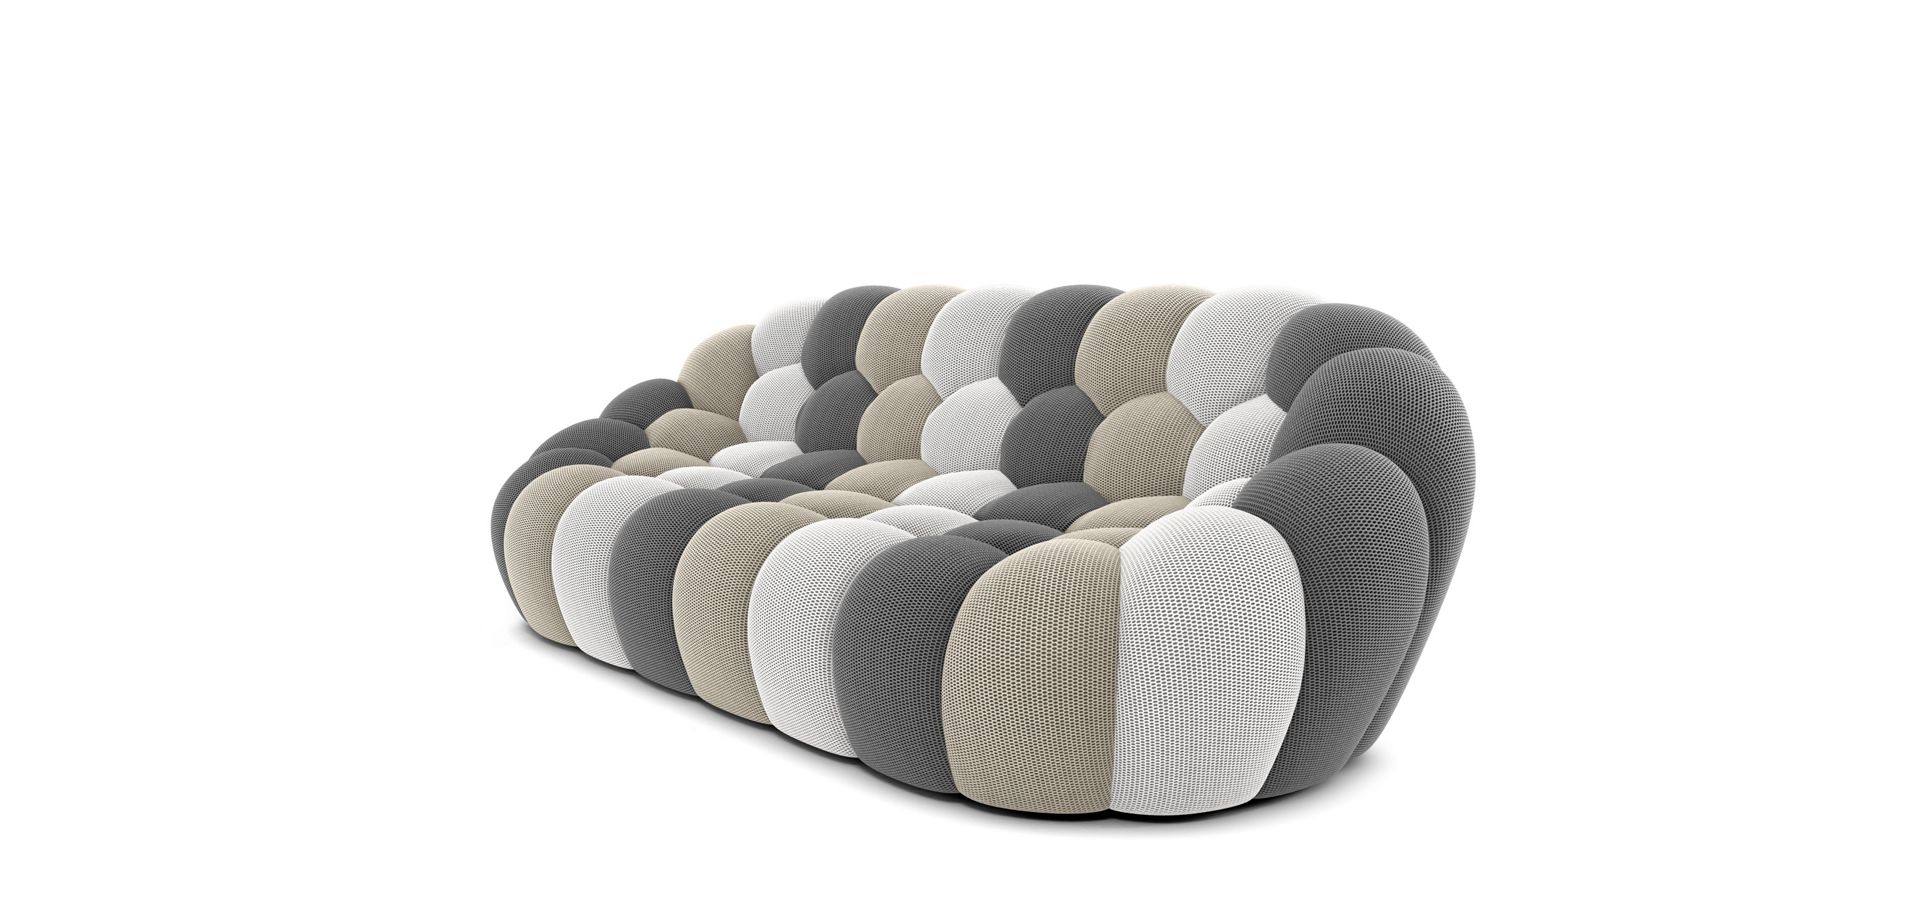 large 3-seat sofa - techno 3D image number 7